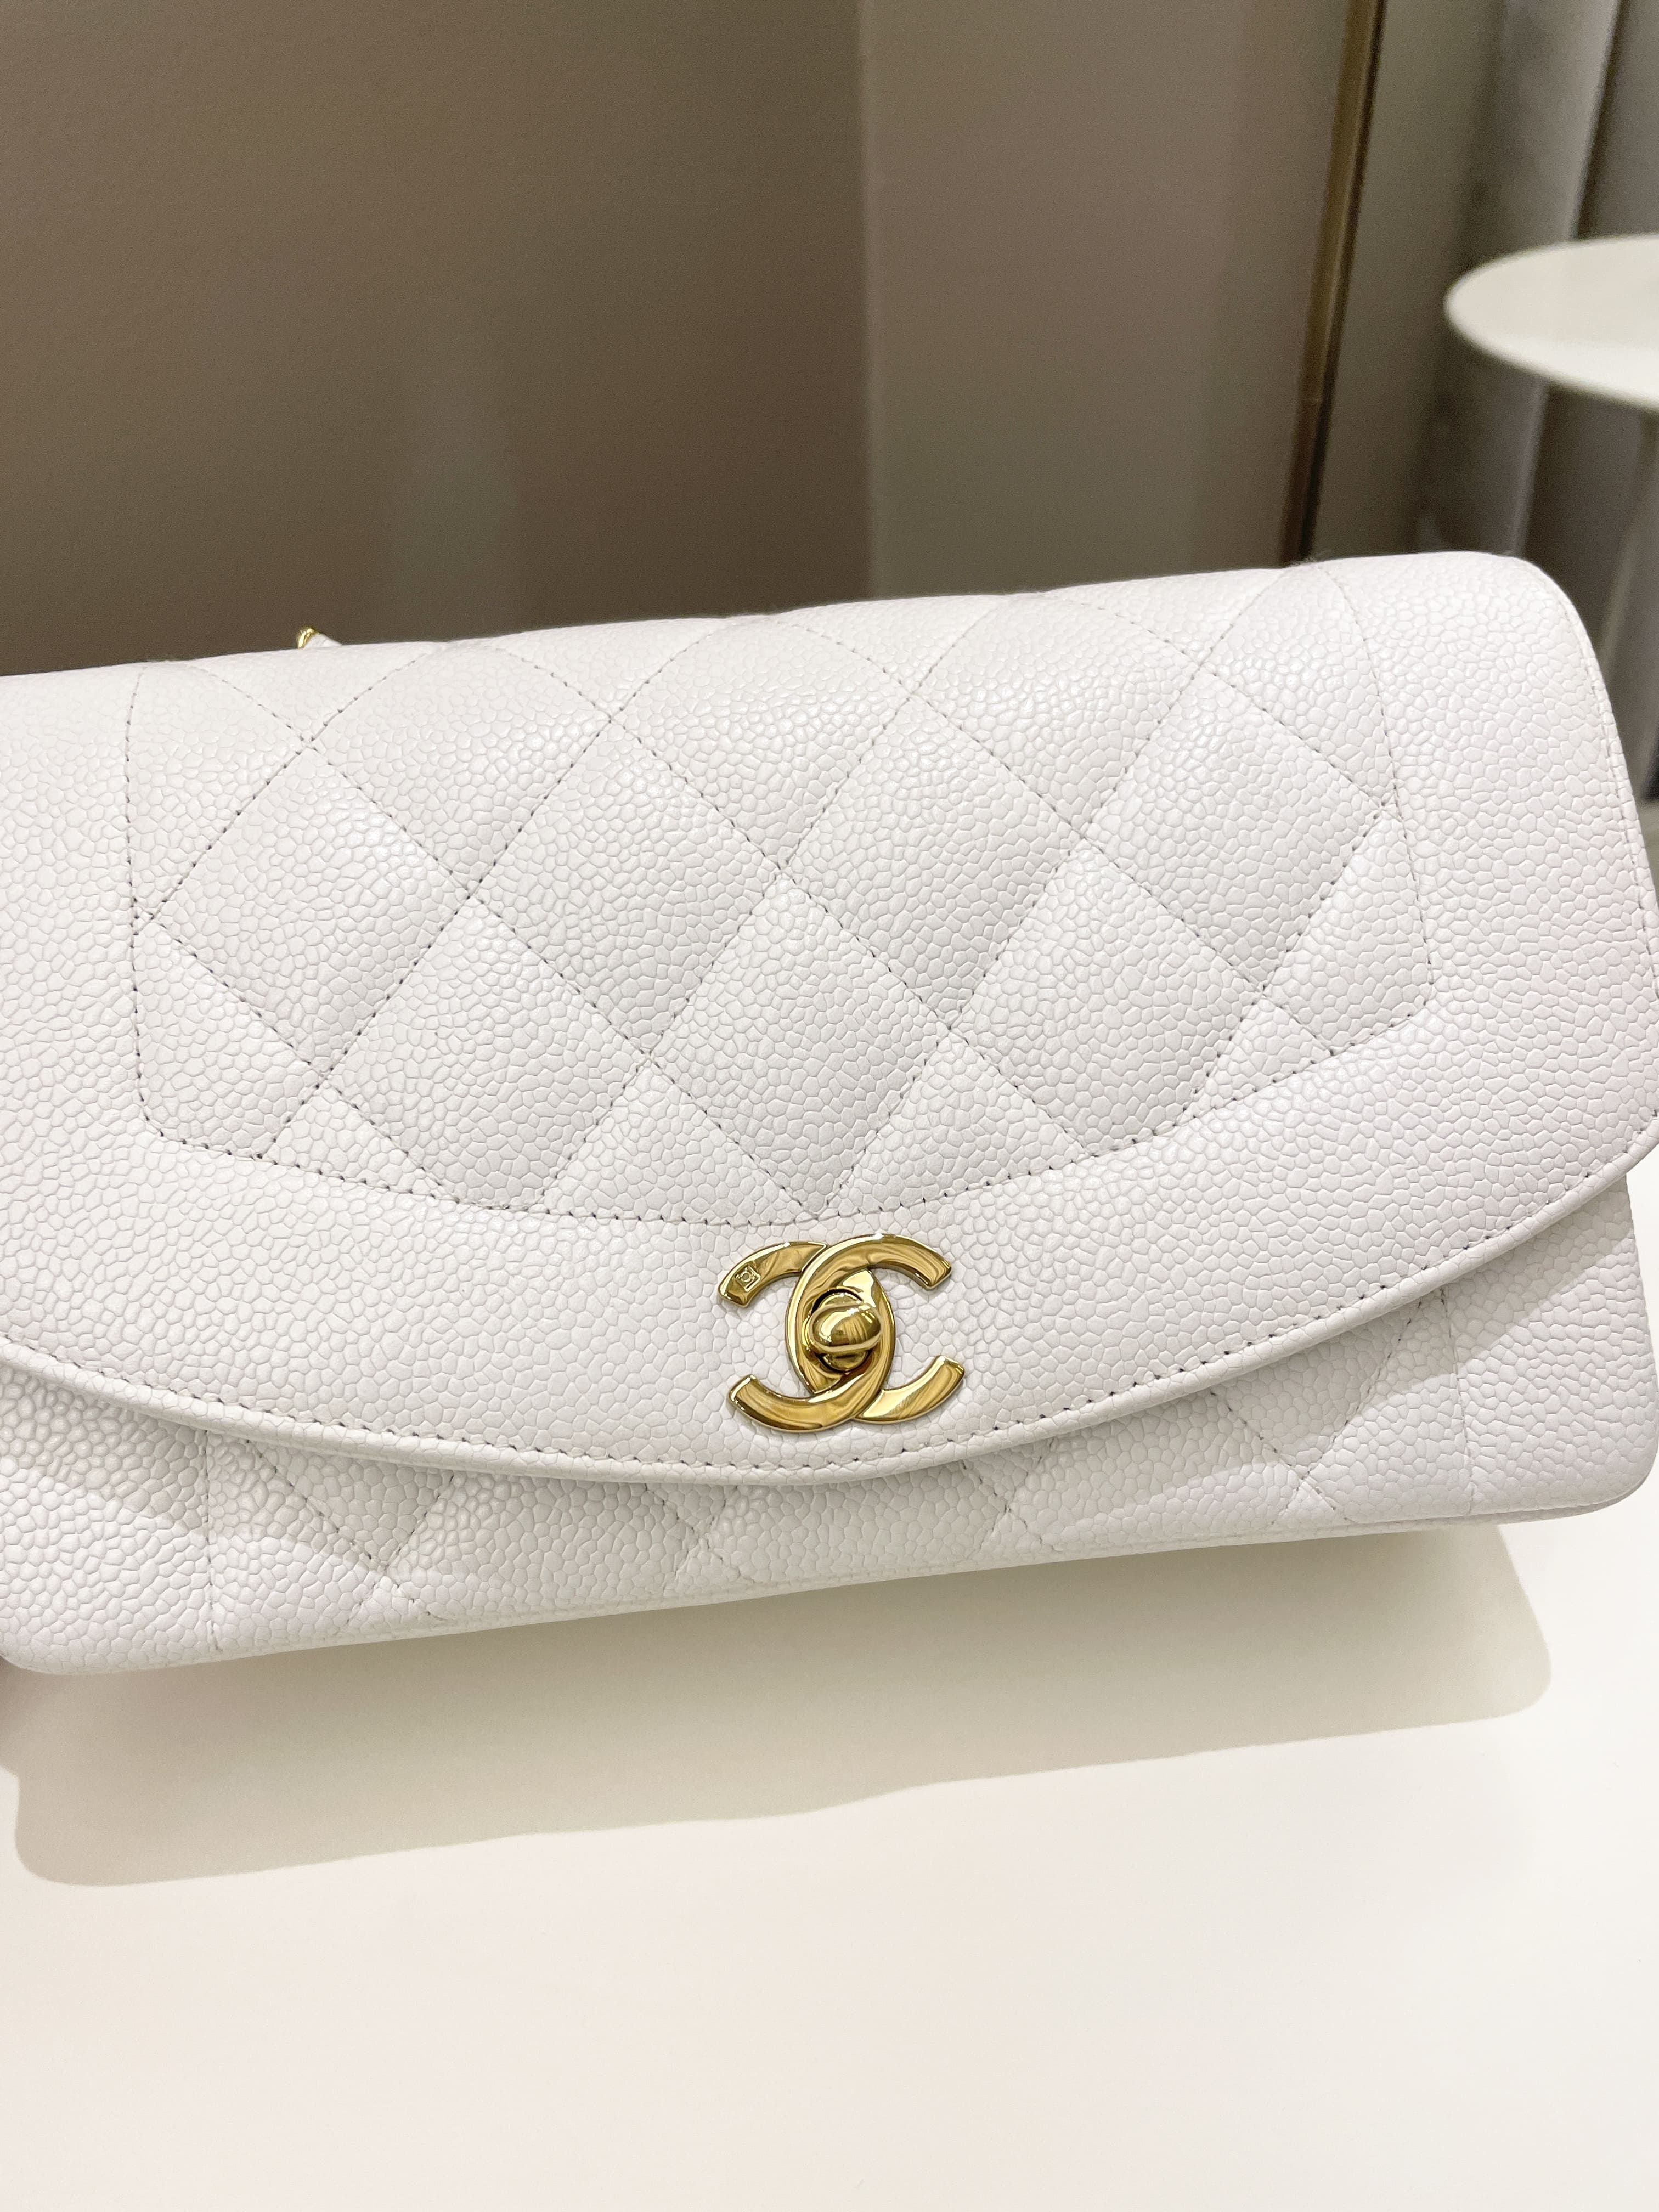 Chanel Vintage Quilted Diana Flap Bag White Caviar